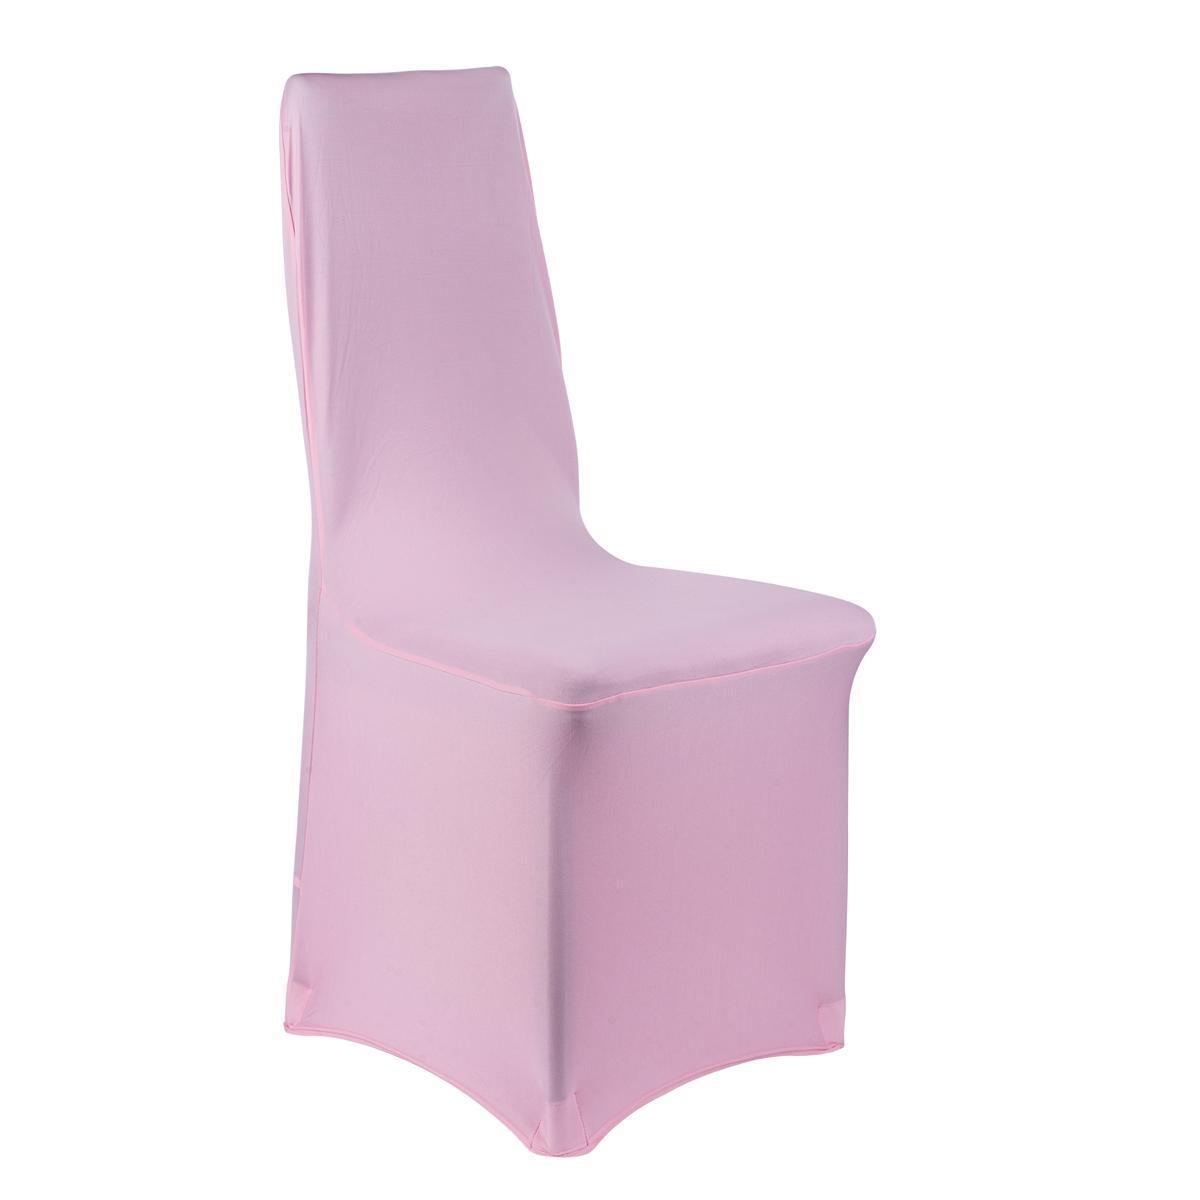 HOUSSE EXTENS. CHAISE ROSE